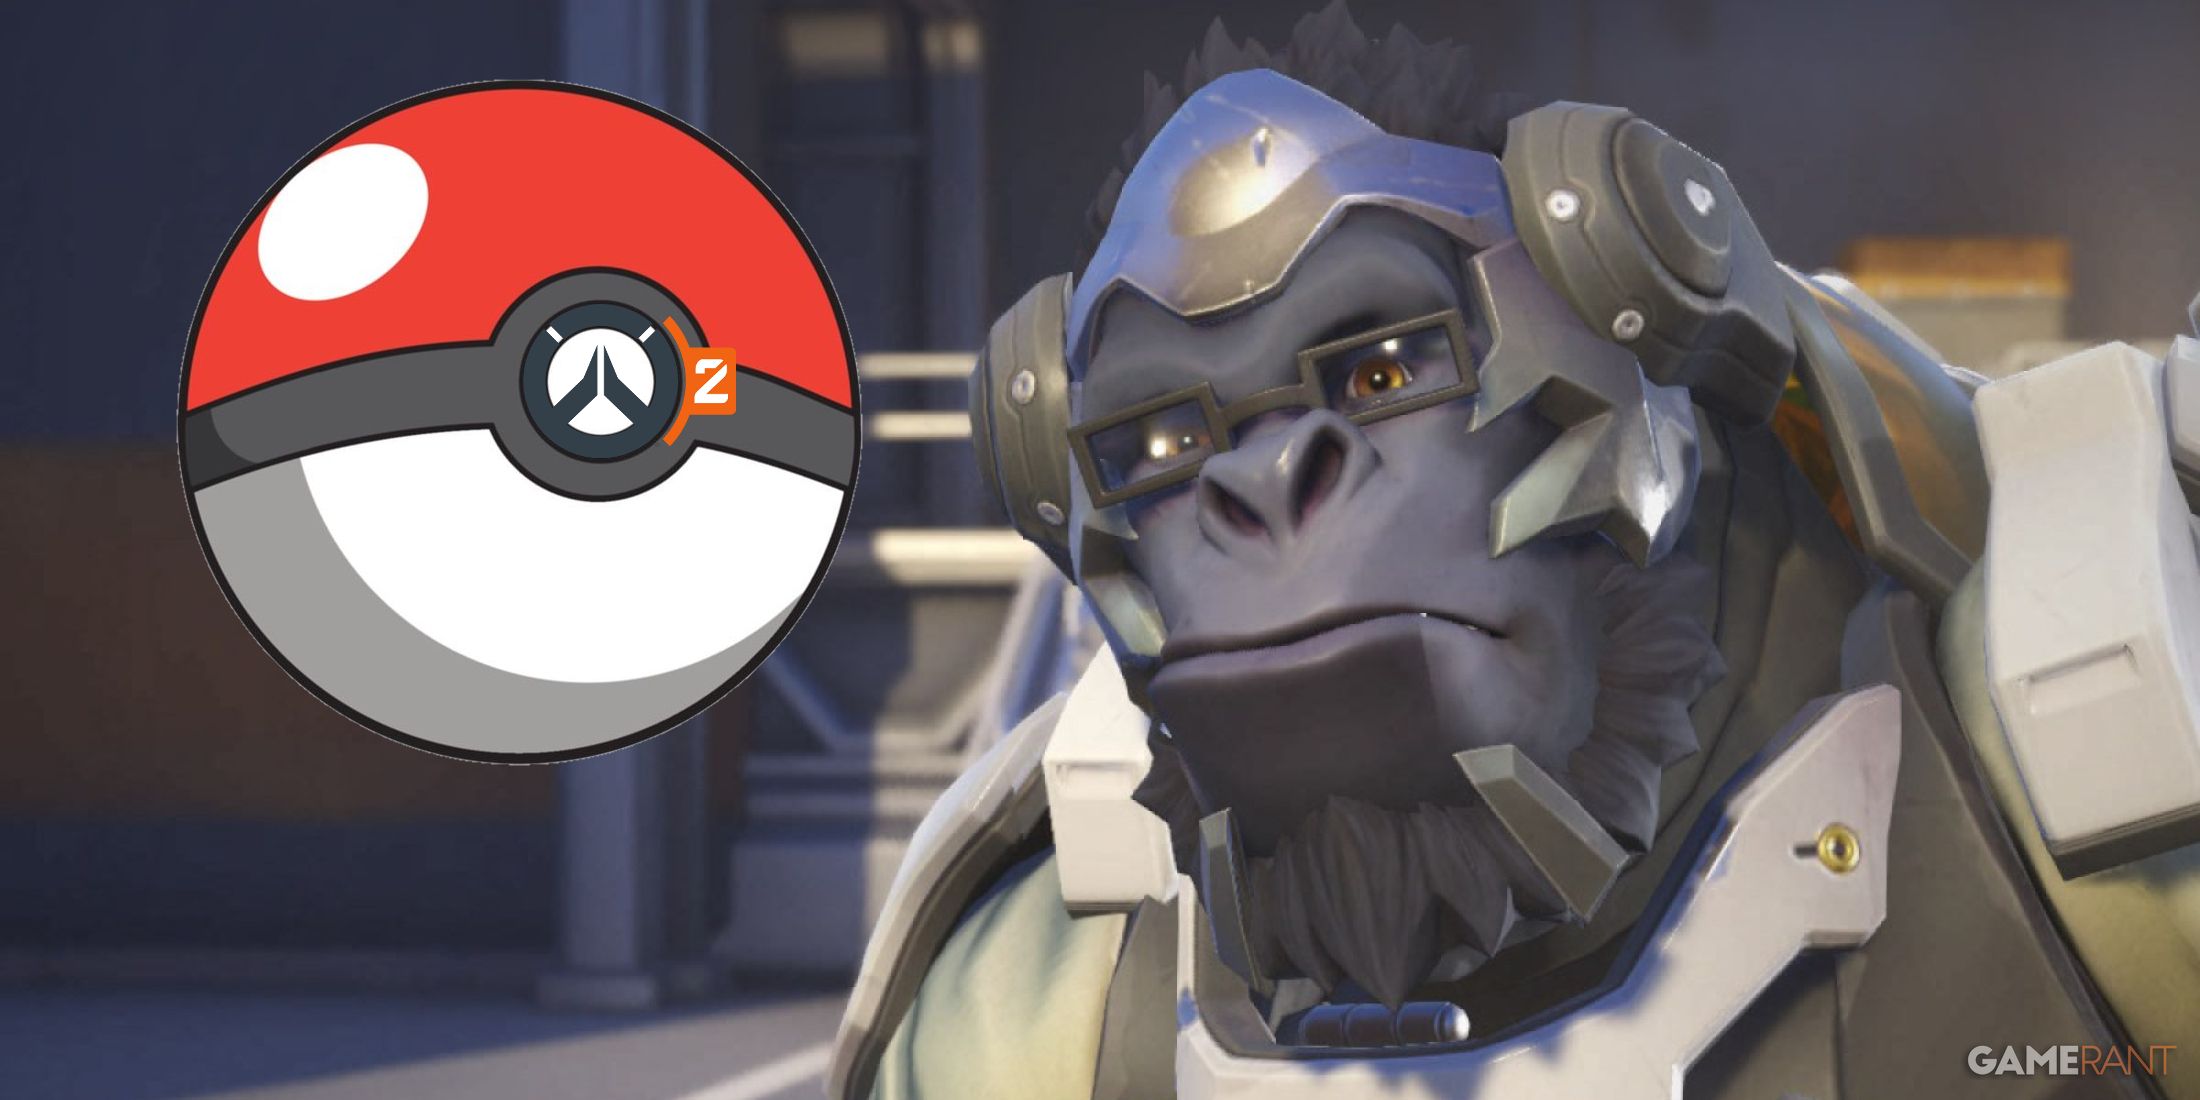 winston from Overwatch 2 with a pokeball and the ow2 logo on it